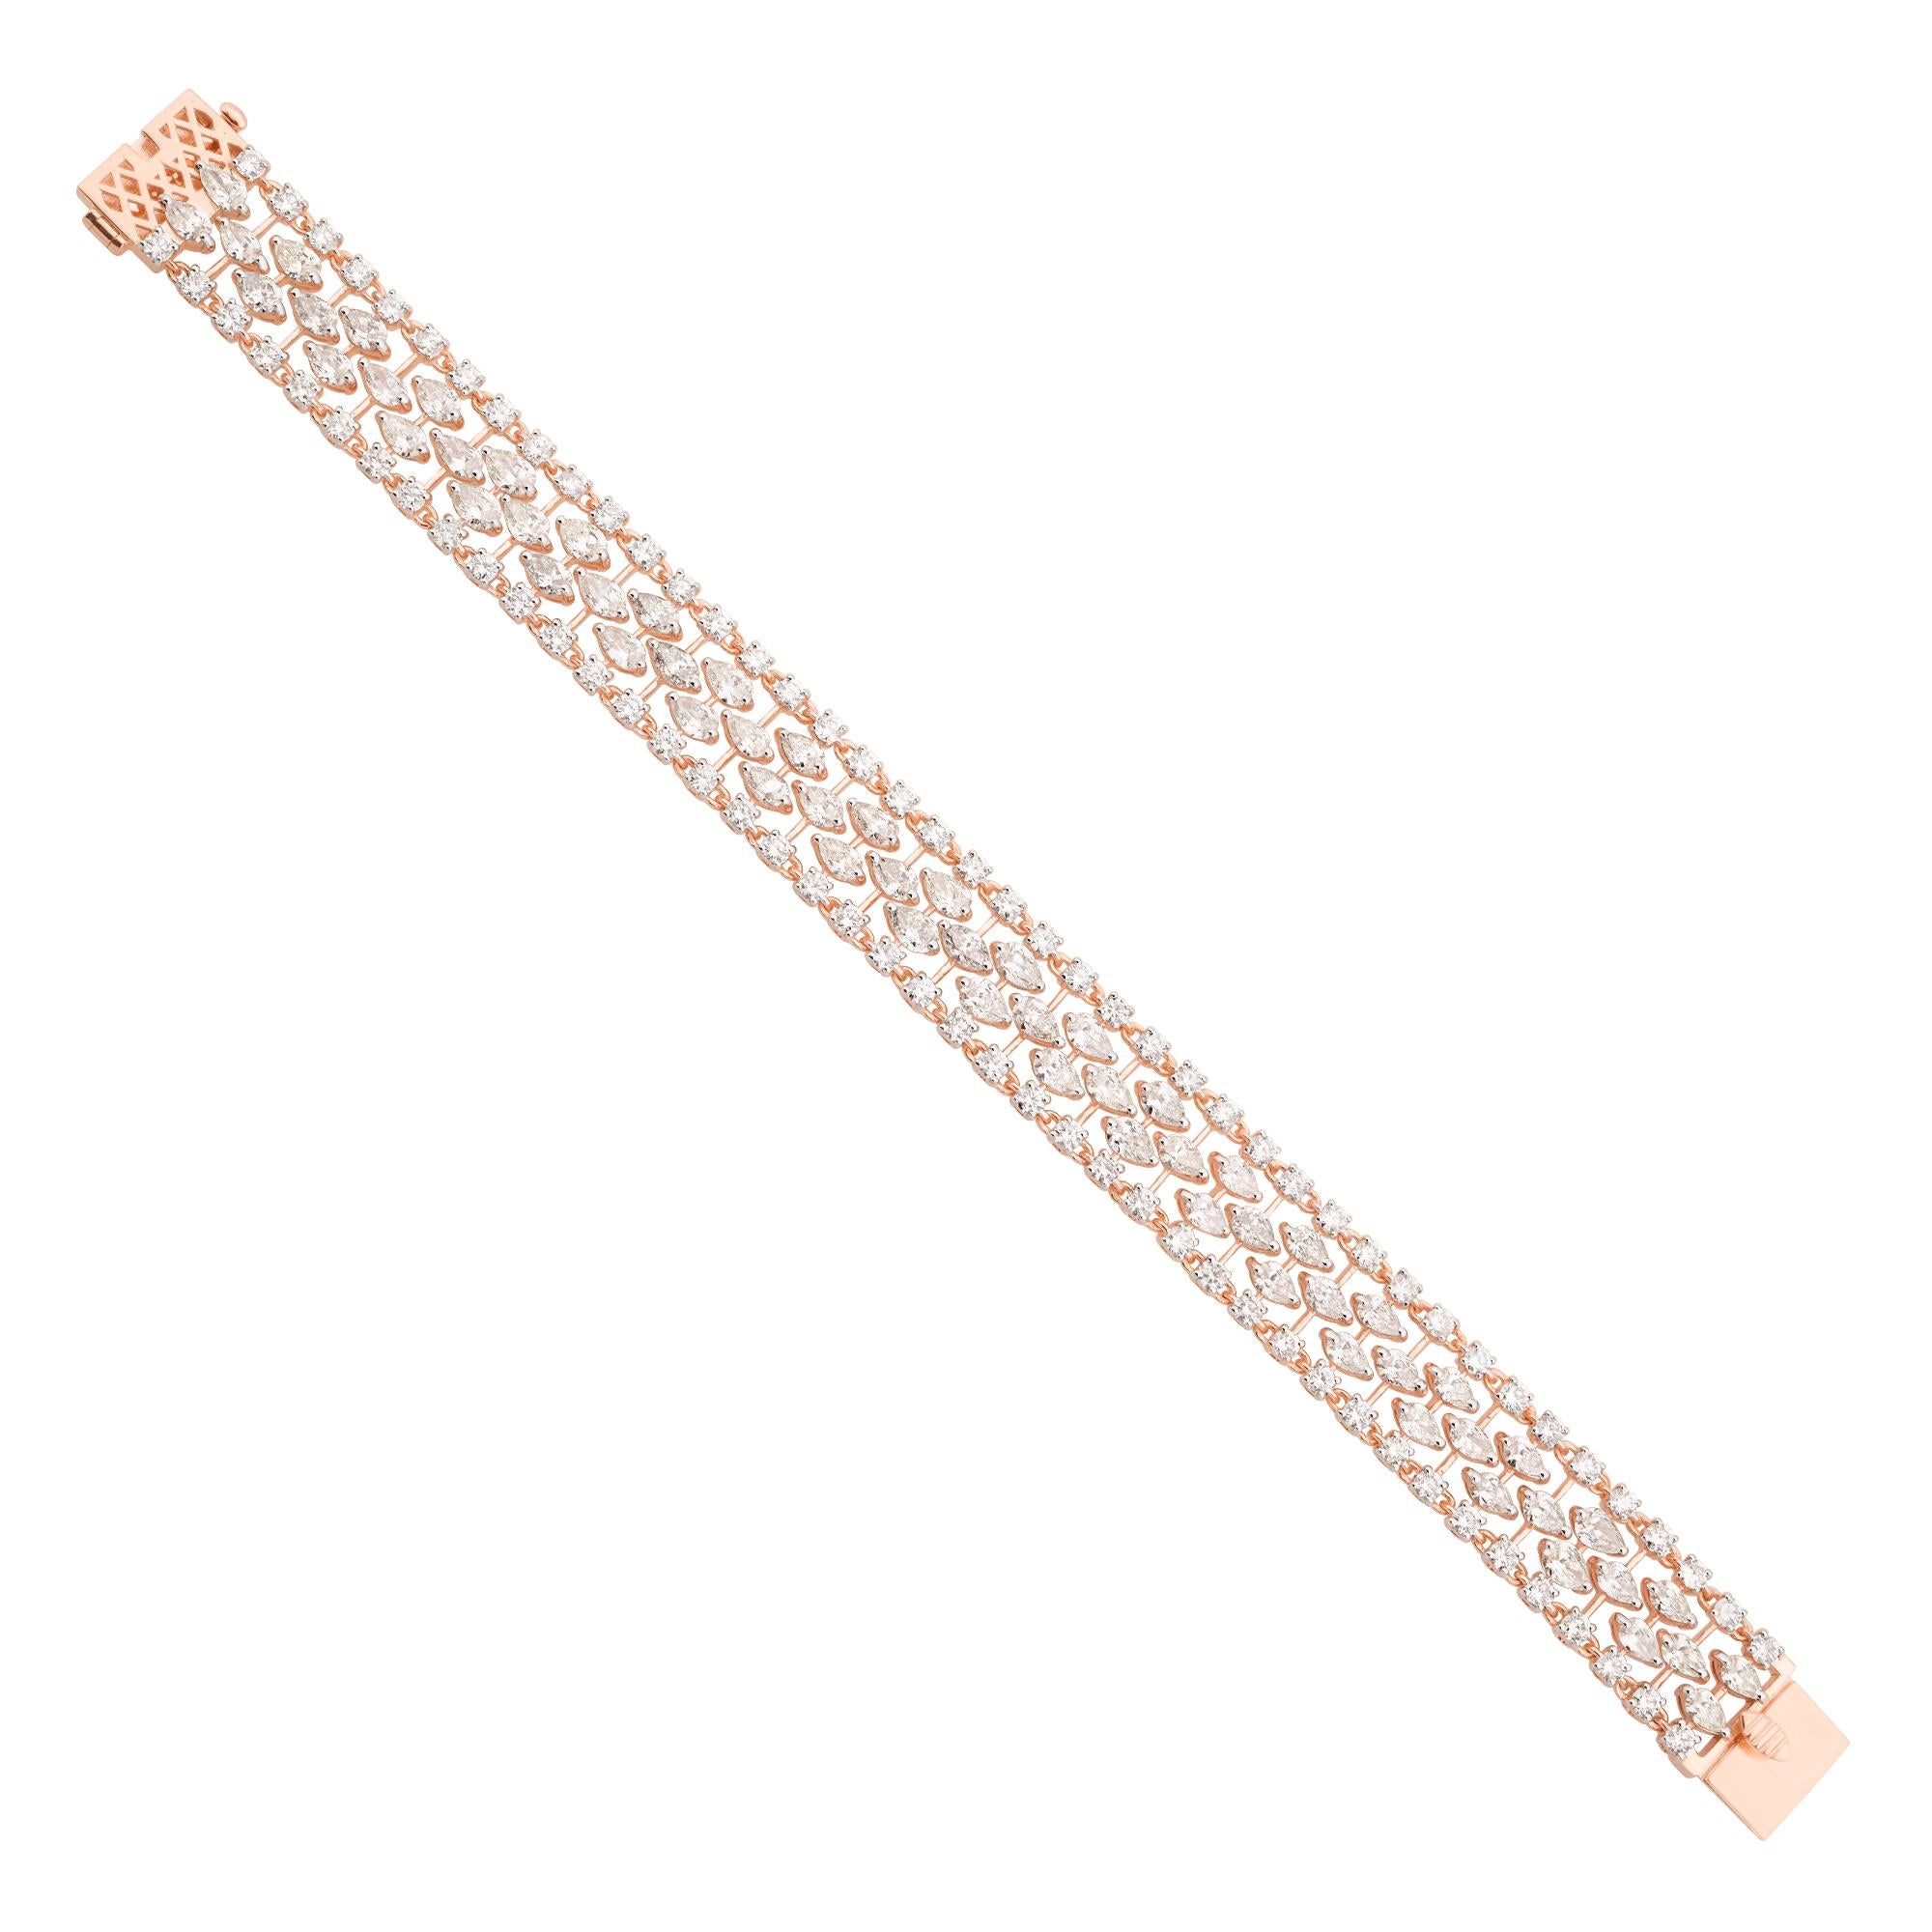 Item Code :- SEBR-41508A (14K)
Gross Wt. :- 23.02 gm
14k Solid Rose Gold Wt. :- 20.48 gm
Natural Diamond Wt. :- 12.70 Ct. ( AVERAGE DIAMOND CLARITY SI1-SI2 & COLOR H-I )
Bracelet Length :- 7 Inches Long

✦ Sizing
.....................
We can adjust